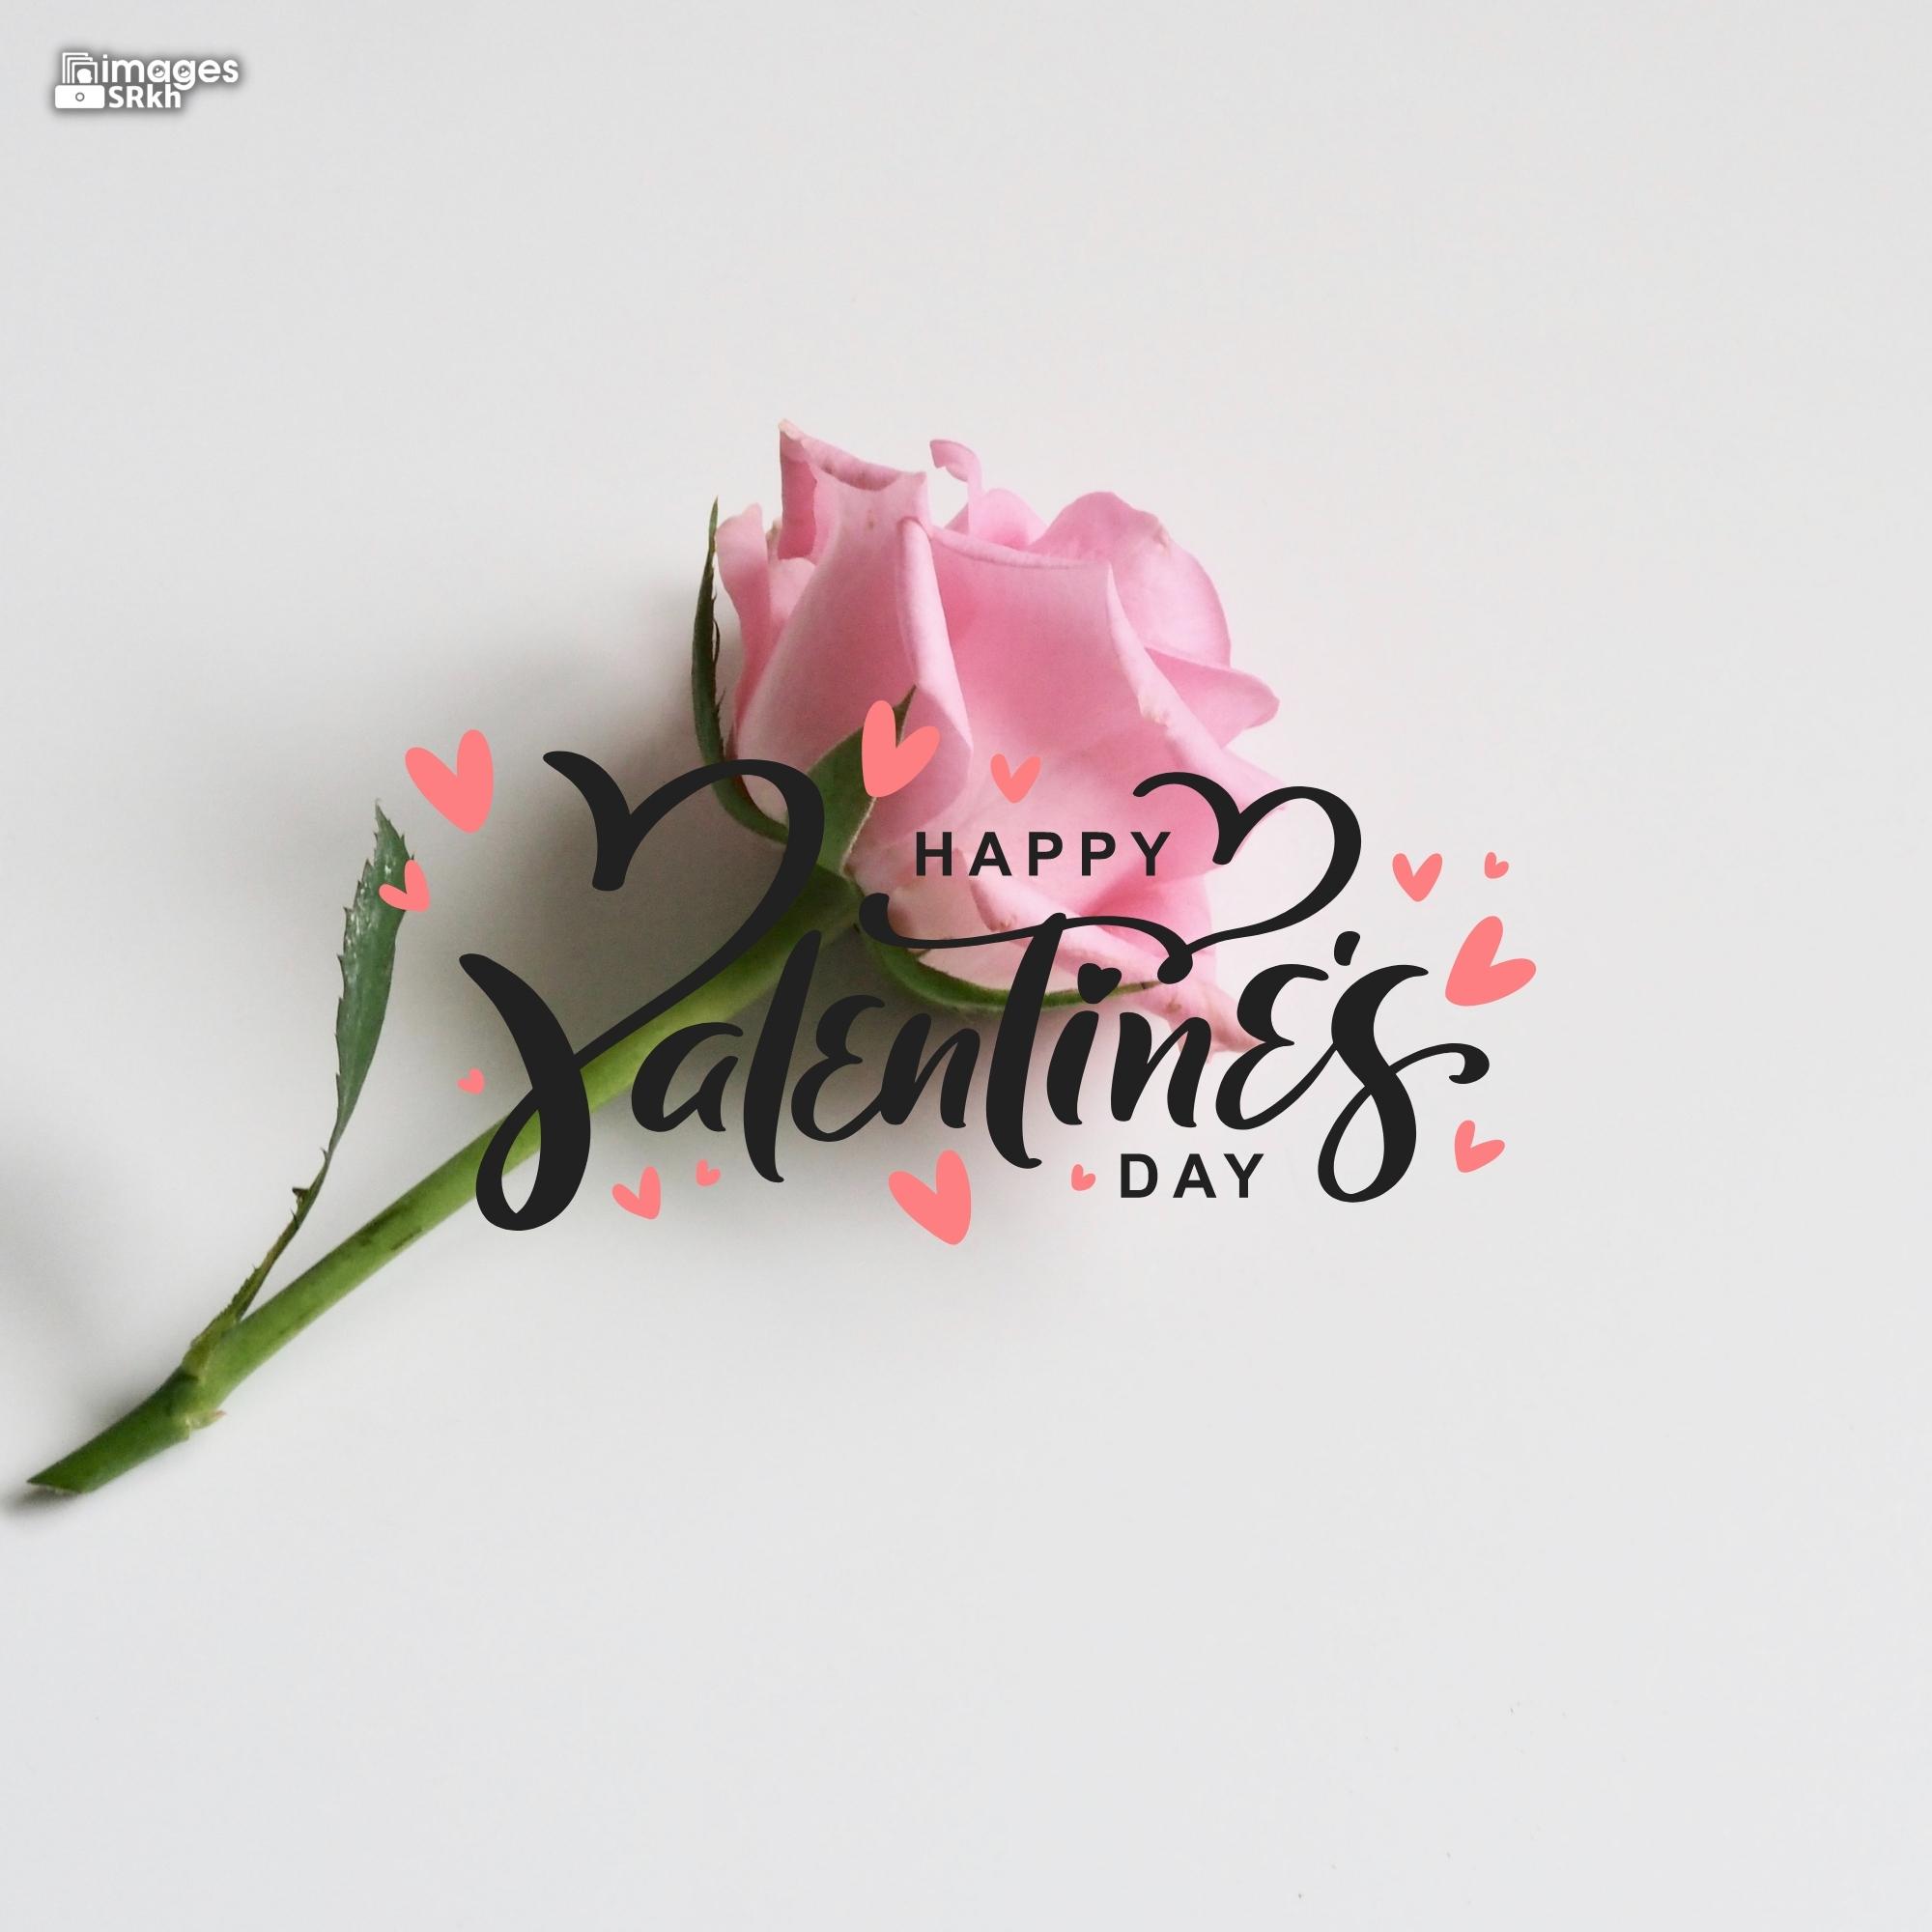 Happy Valentines Day | 552 | PREMIUM IMAGES | Wishes for Love